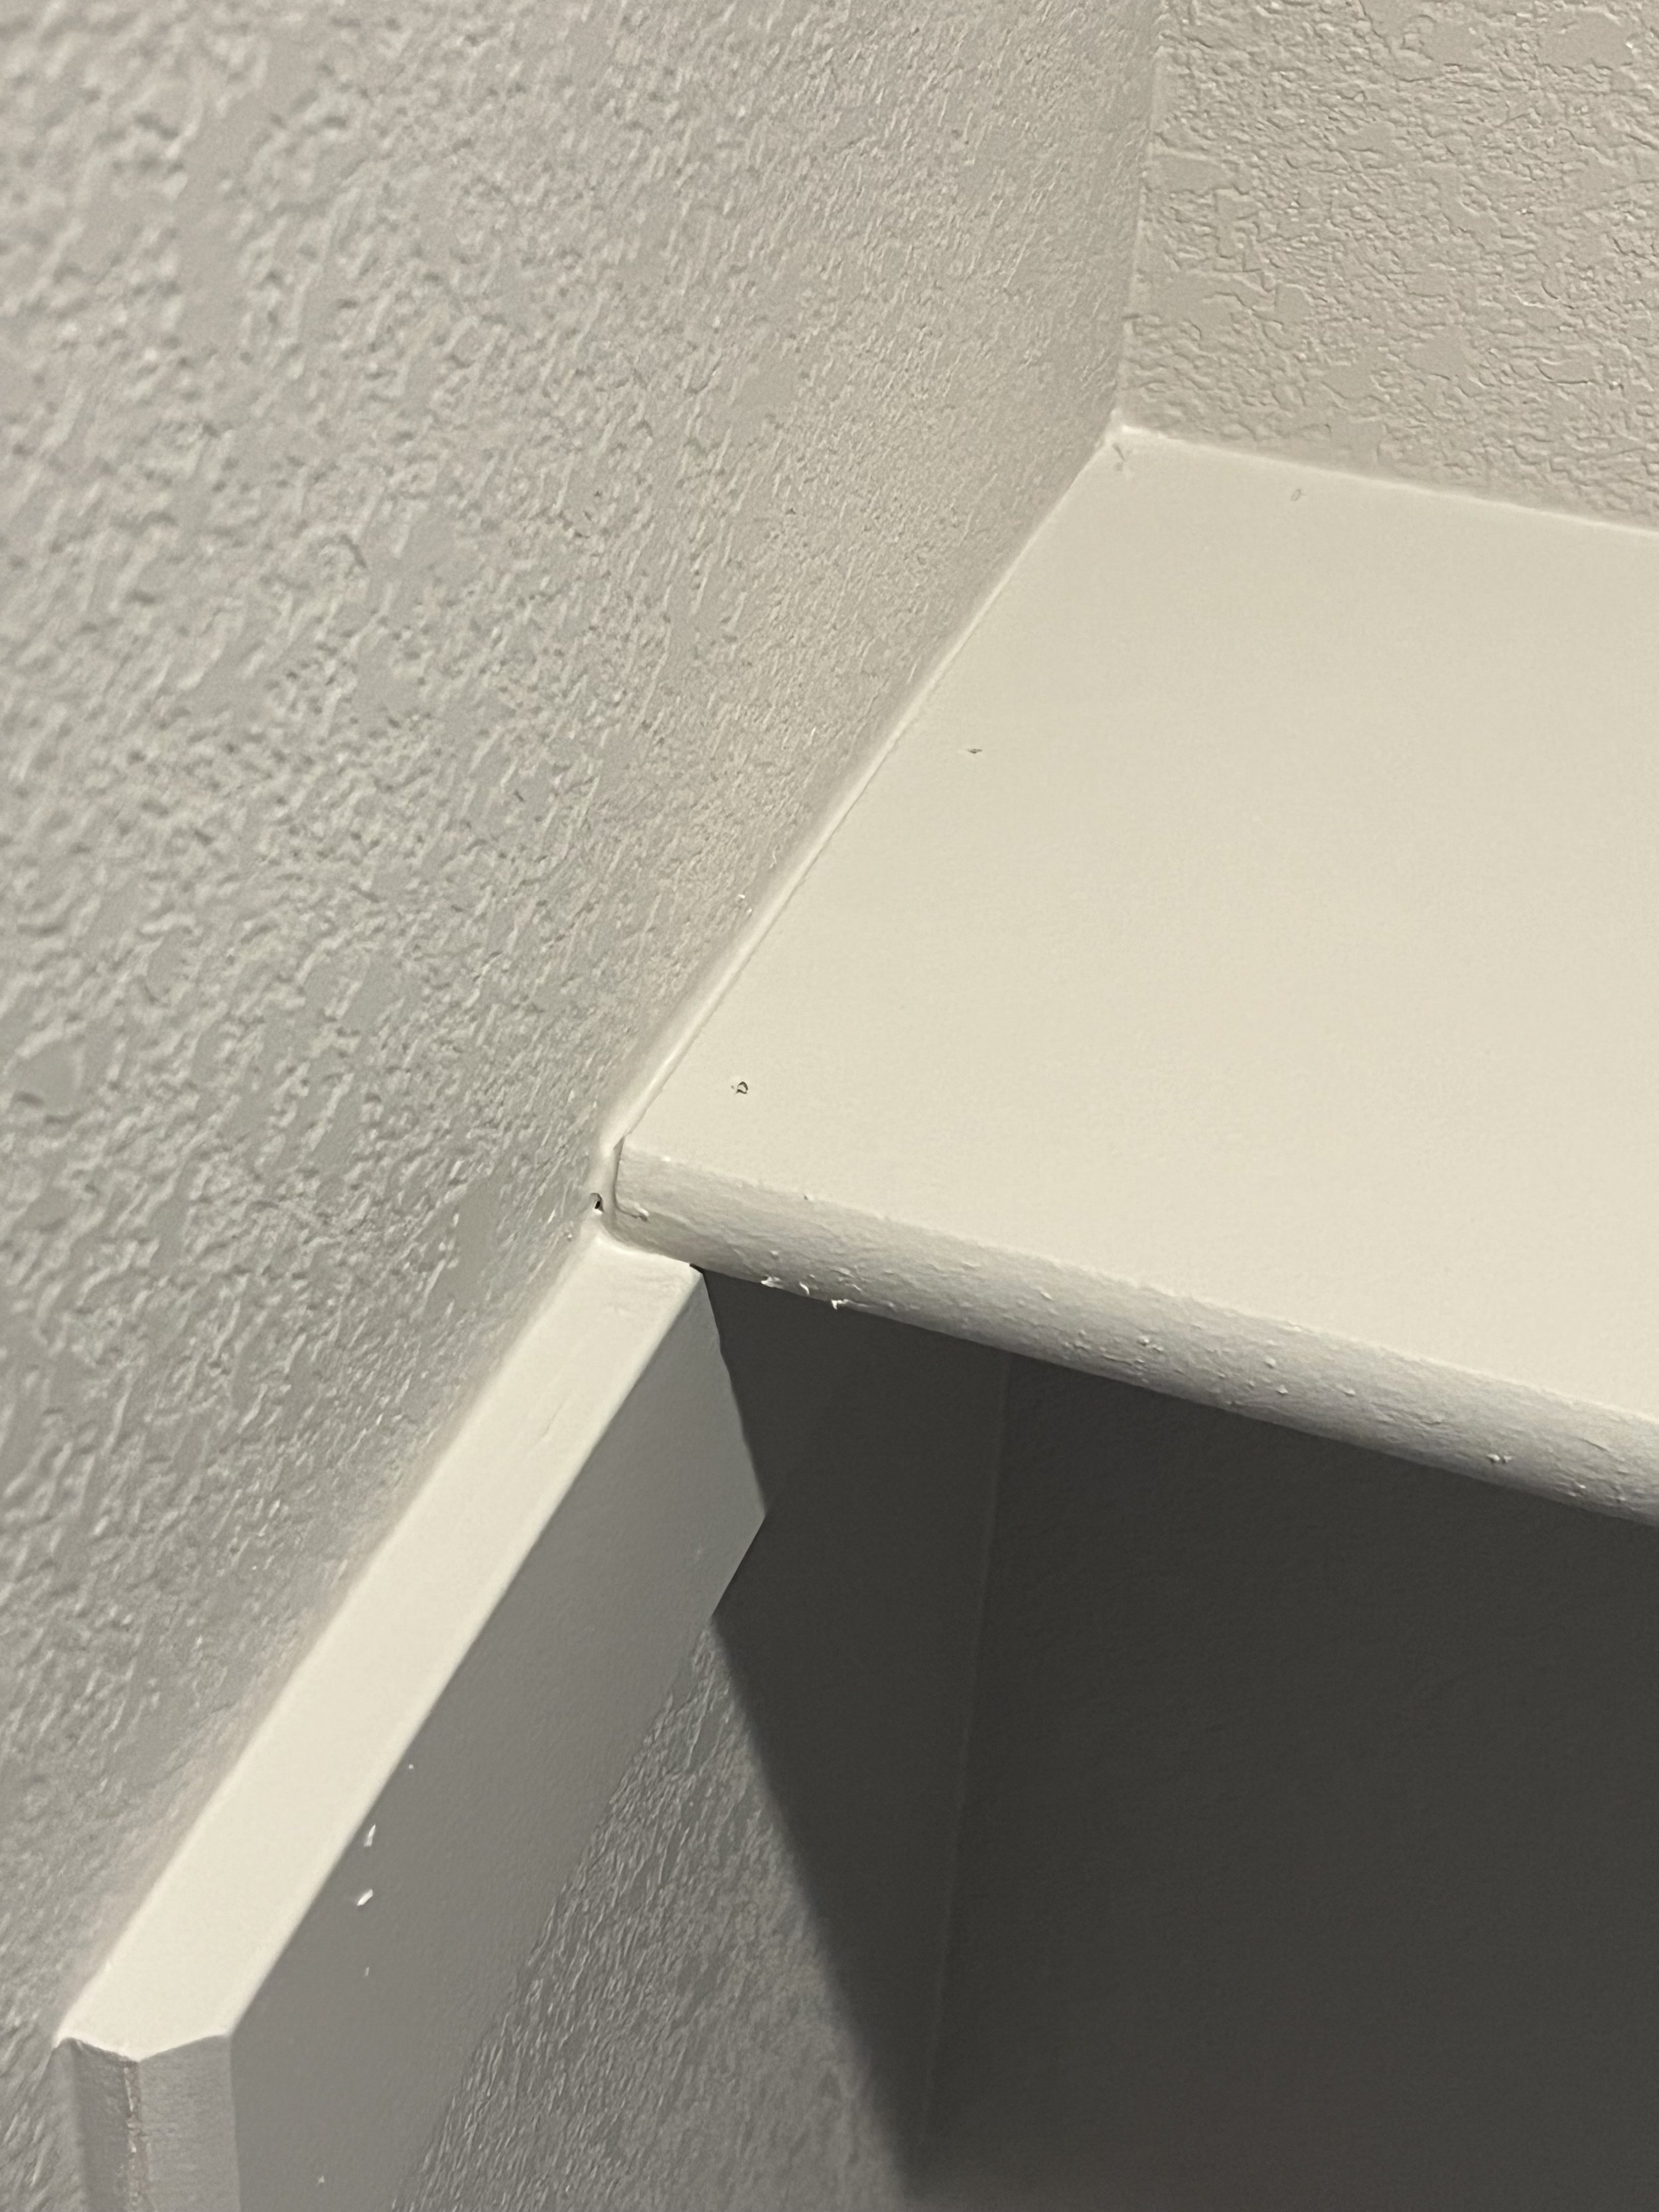 Shelf supports visible